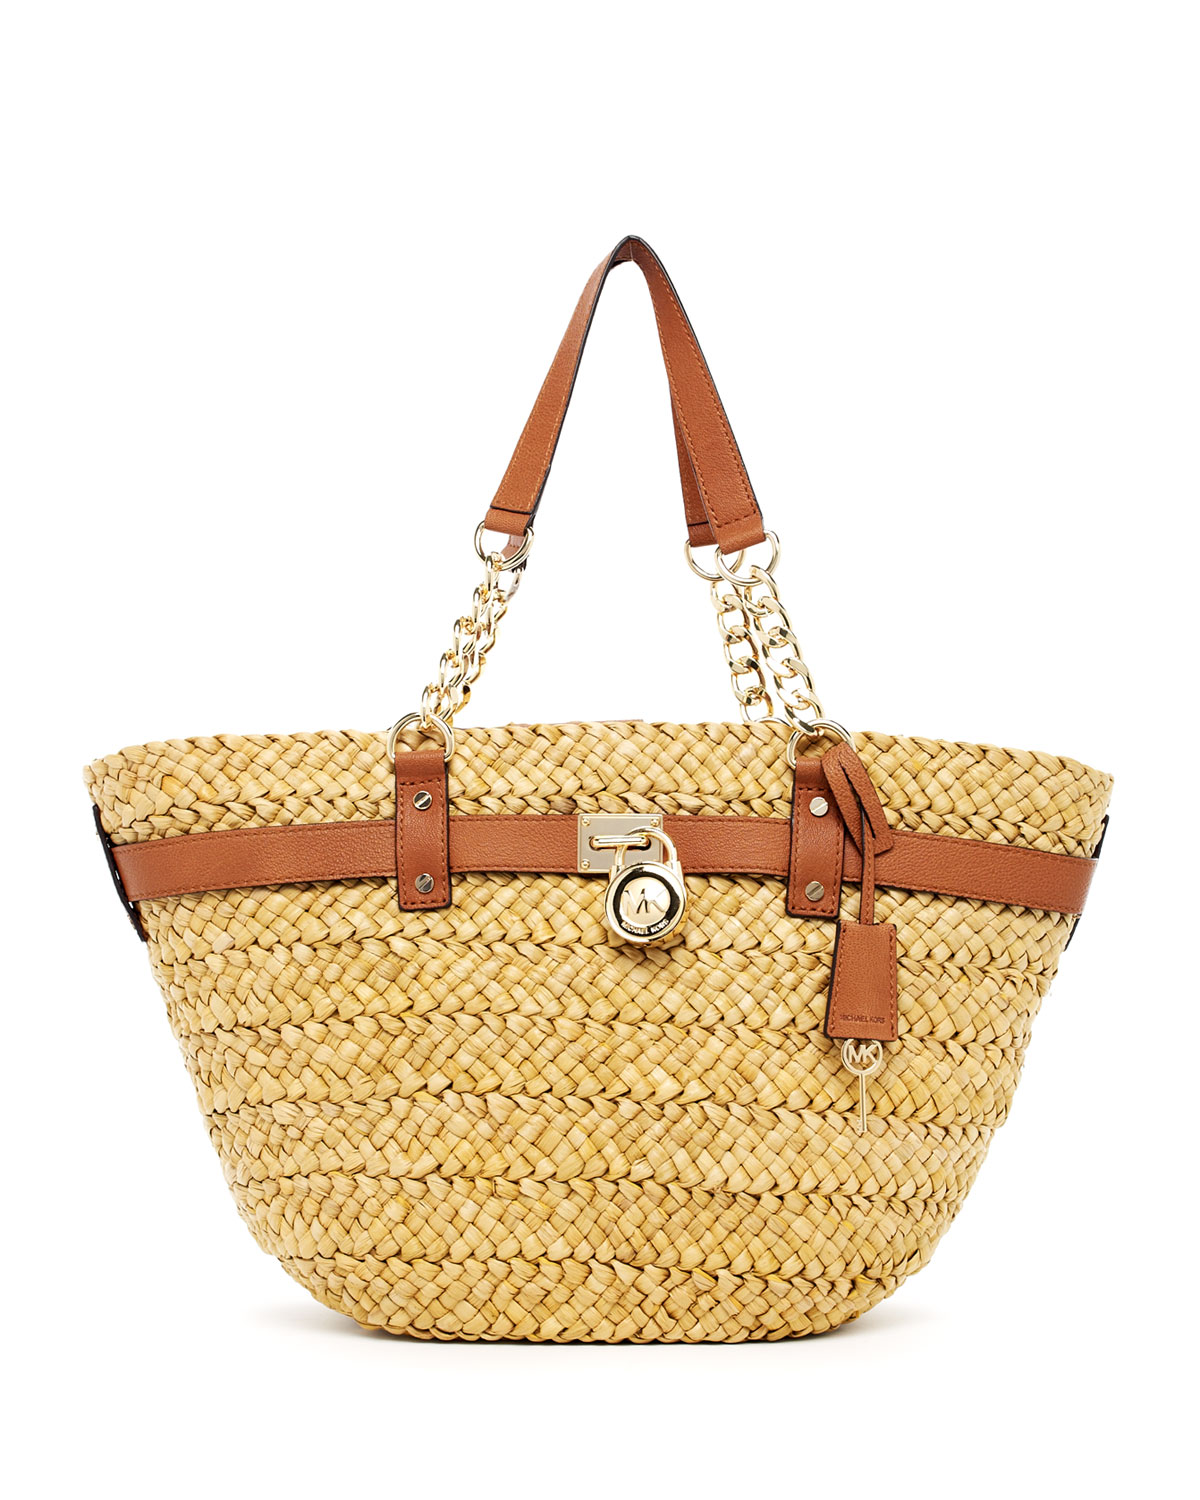 Lyst - Michael kors Hamilton Large Straw Tote Luggage in Natural